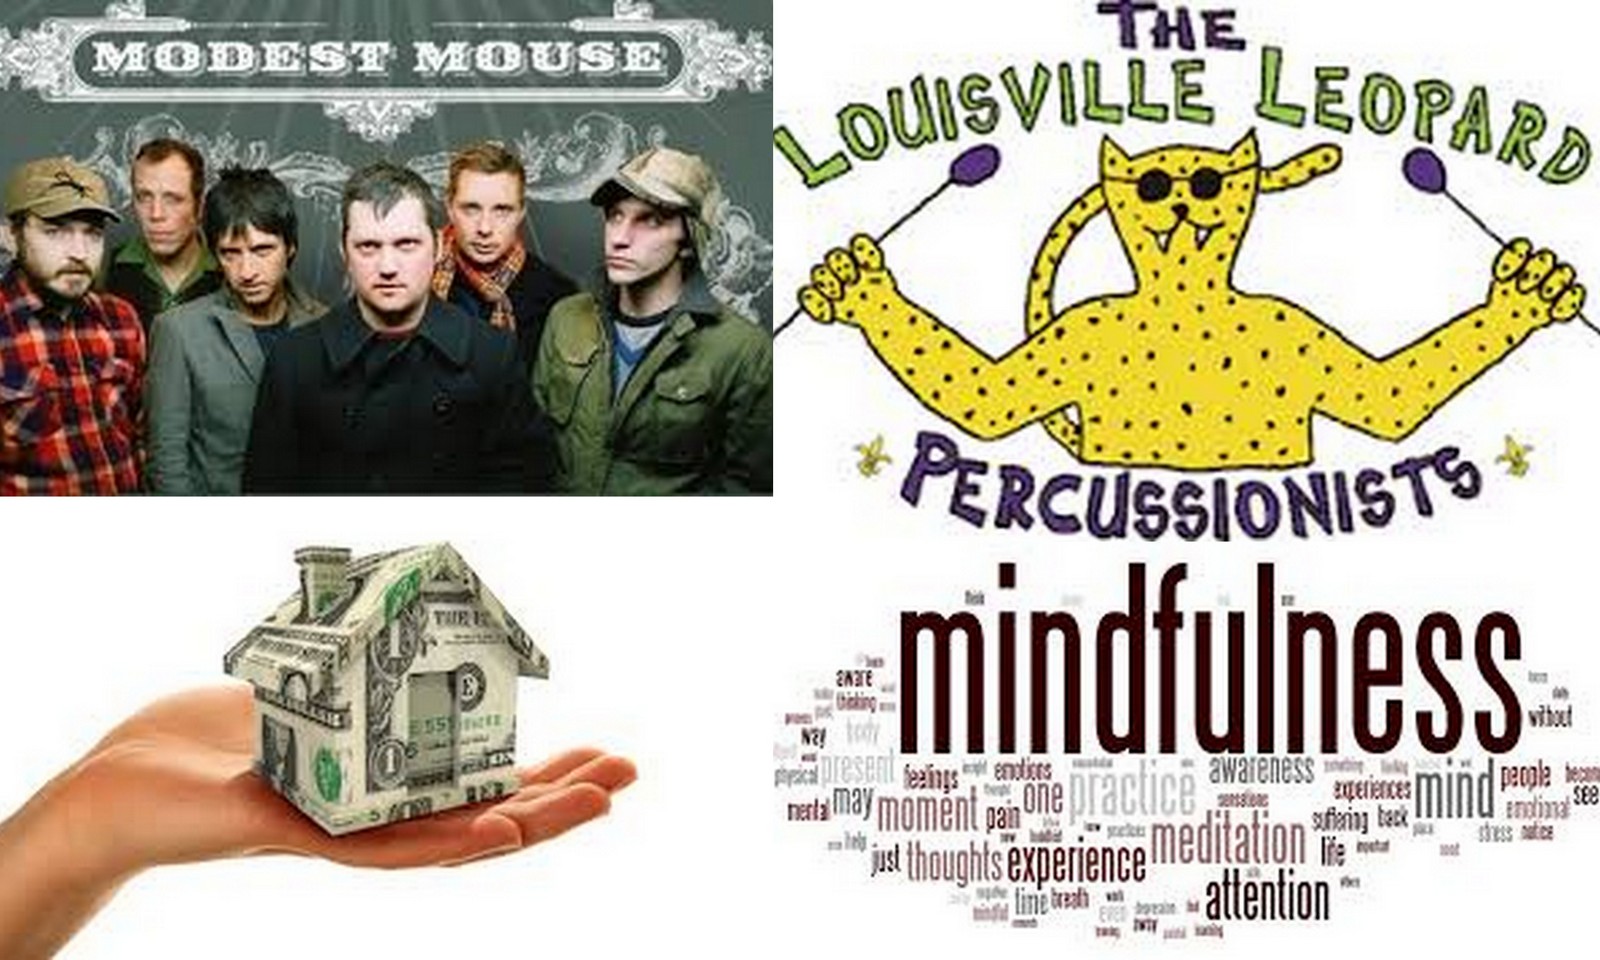 ​LOUISVILLE NOW! Gonzo fest, investing that tax return, Mindfulness and MORE